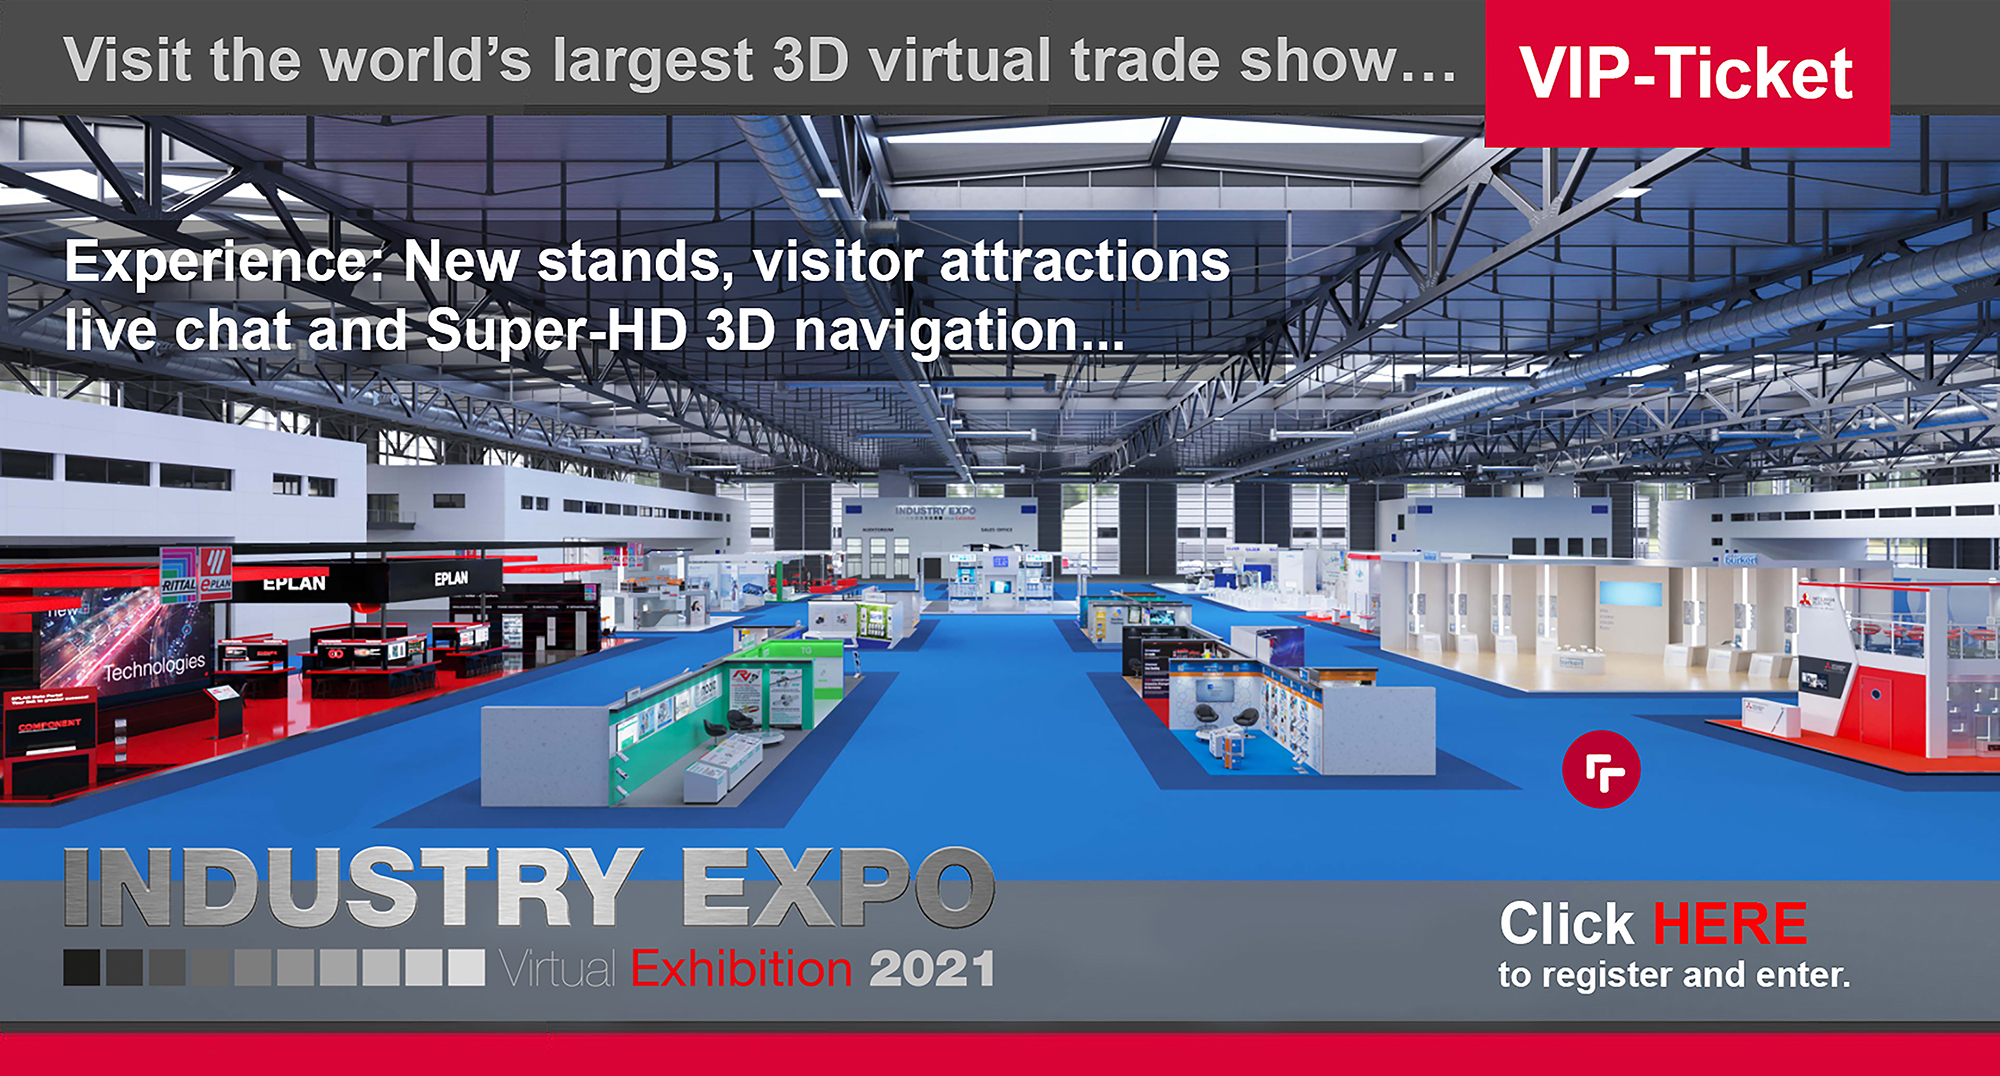 e-tickets have been issued for IndustryExpo 2021, allowing visitors to ‘click’ to enter and explore a wide range of innovative engineered products, automation, training, and software solutions.